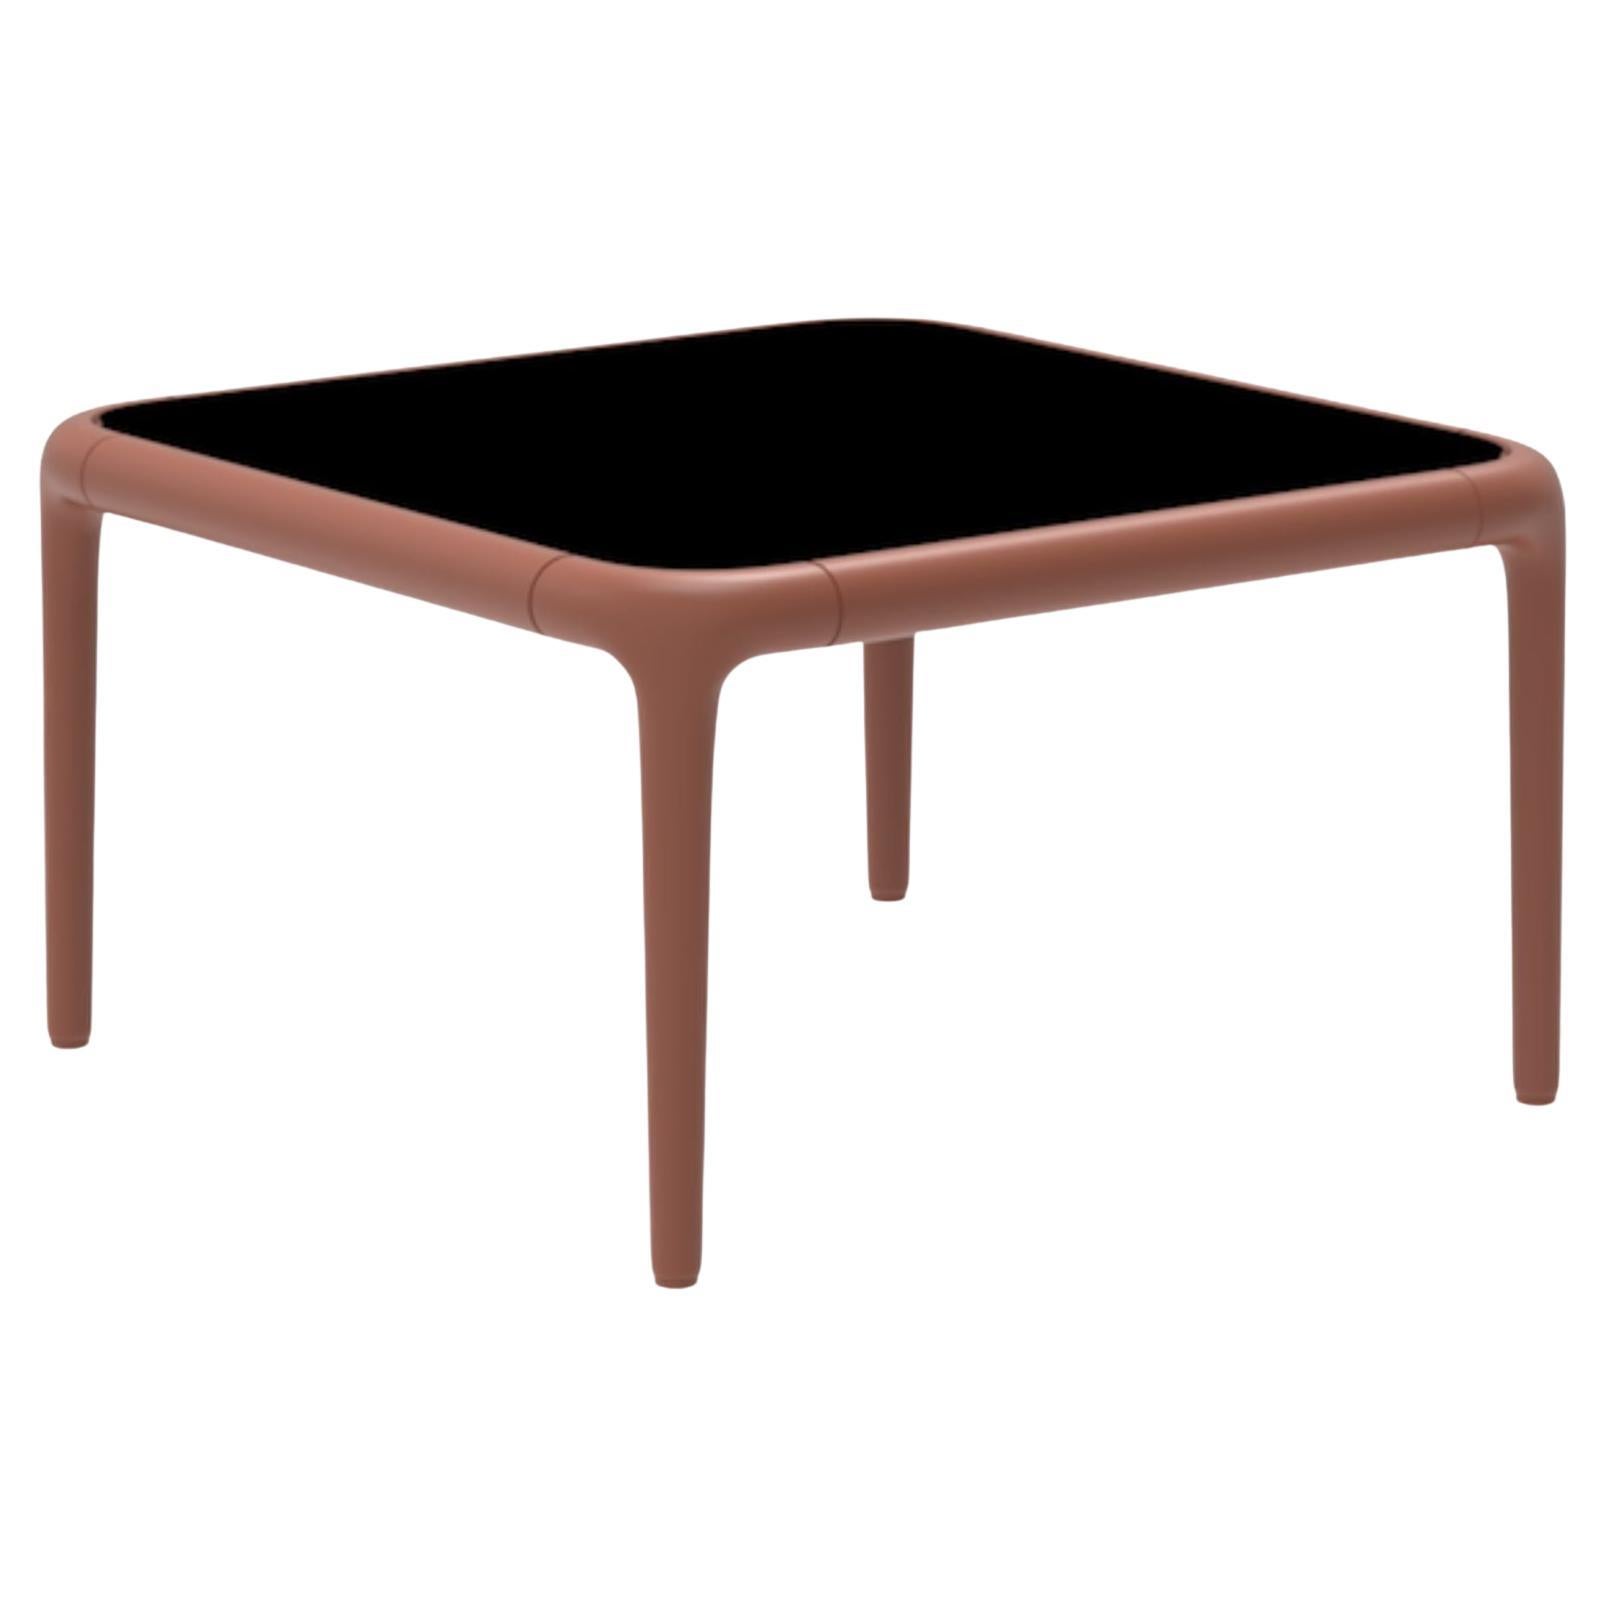 Xaloc Salmon Coffee Table 50 with Glass Top by Mowee For Sale